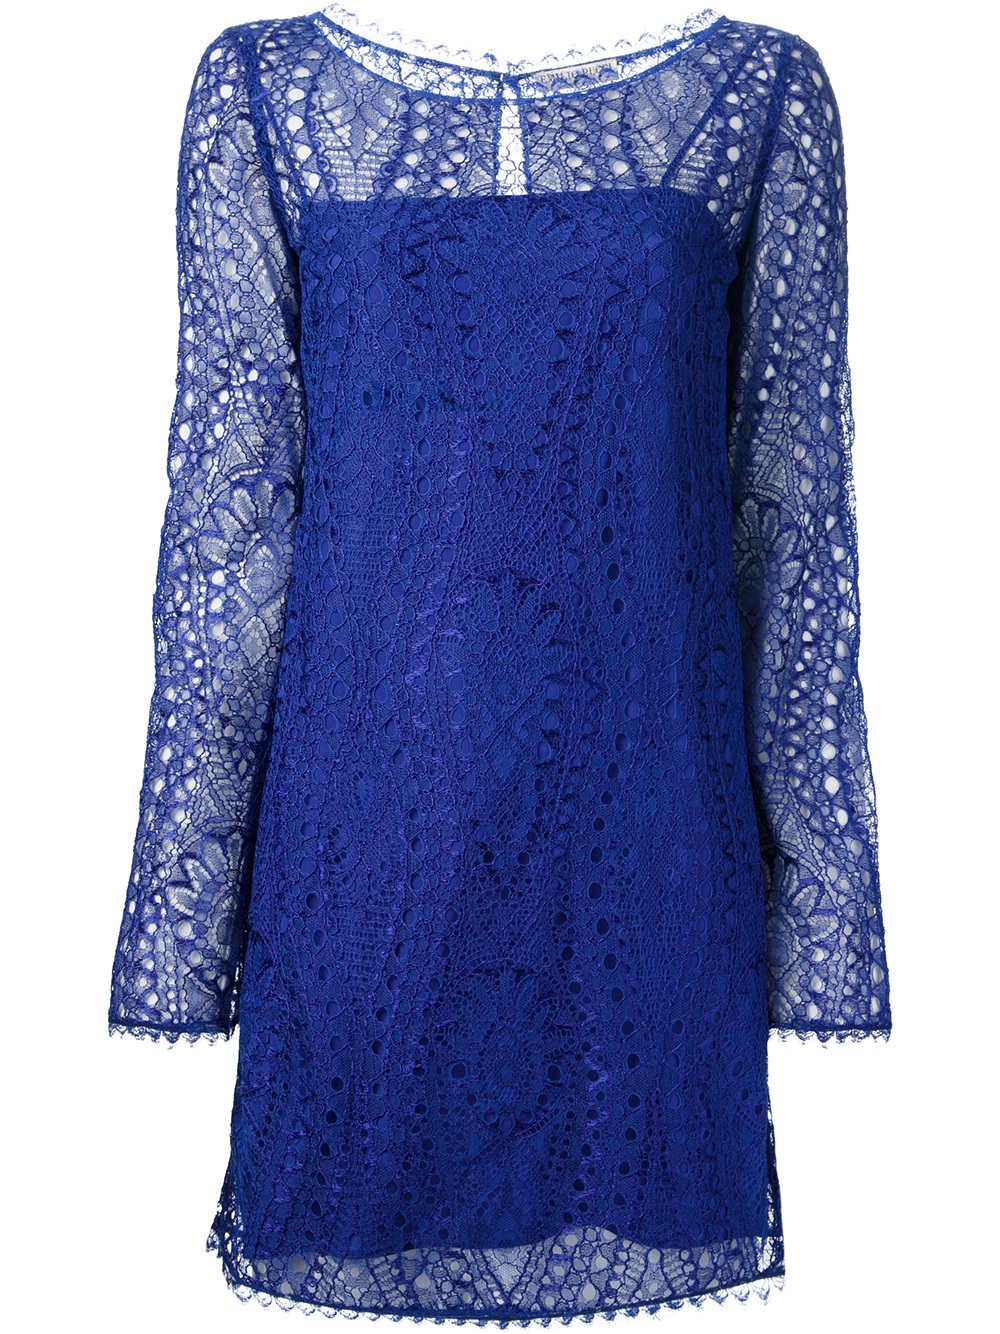 Lyst - Emilio Pucci Lace Overlay Dress in Blue